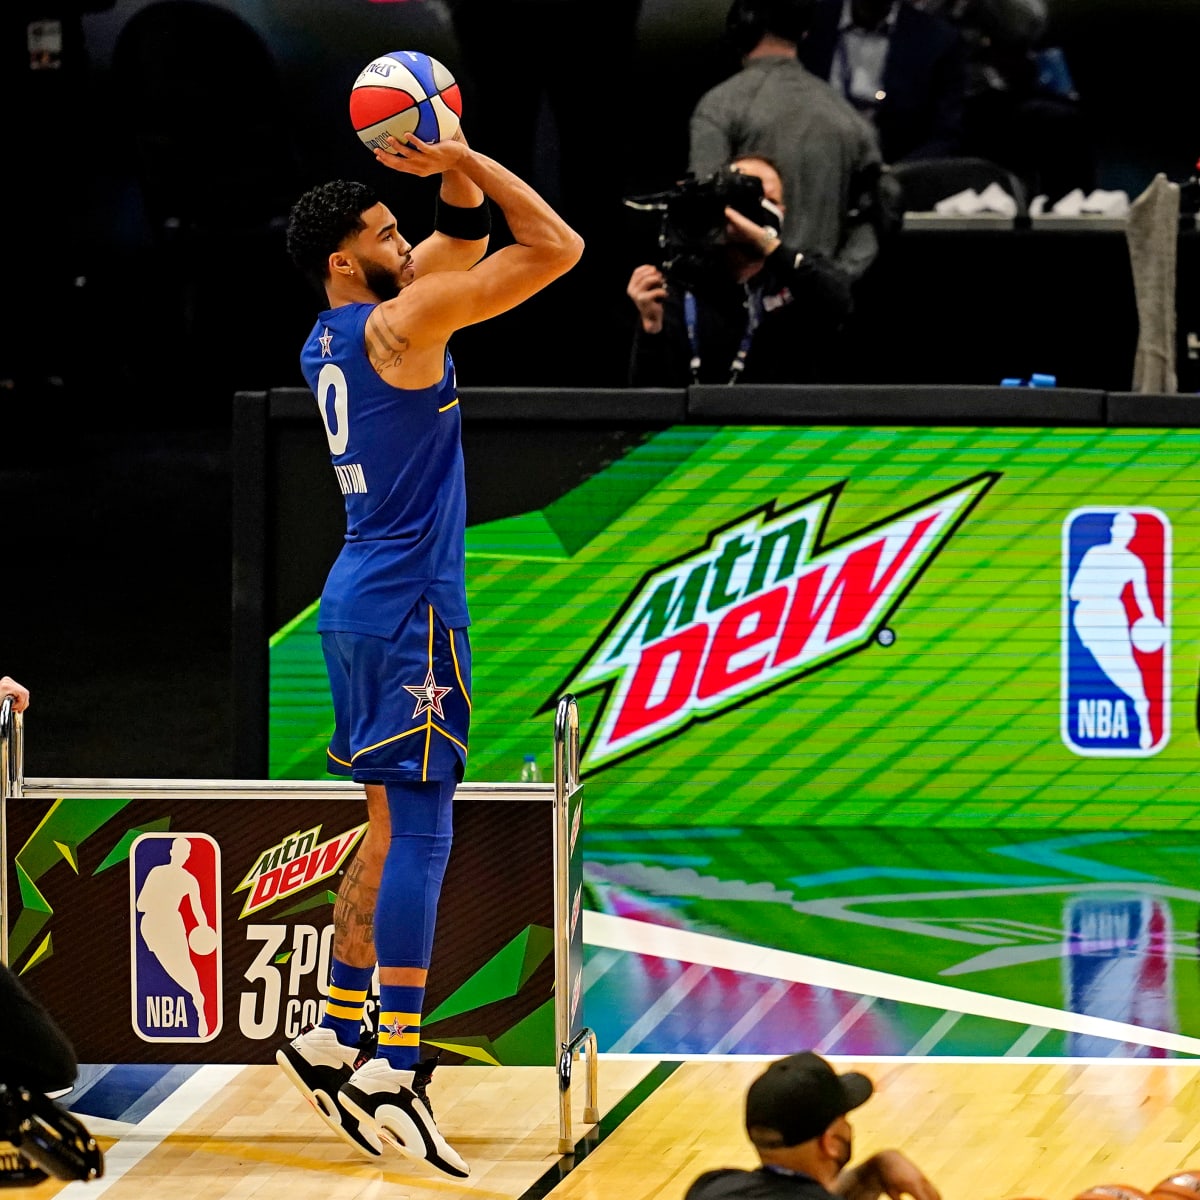 Watch: Trae Young drains halfcourt buzzer beater in NBA All-Star